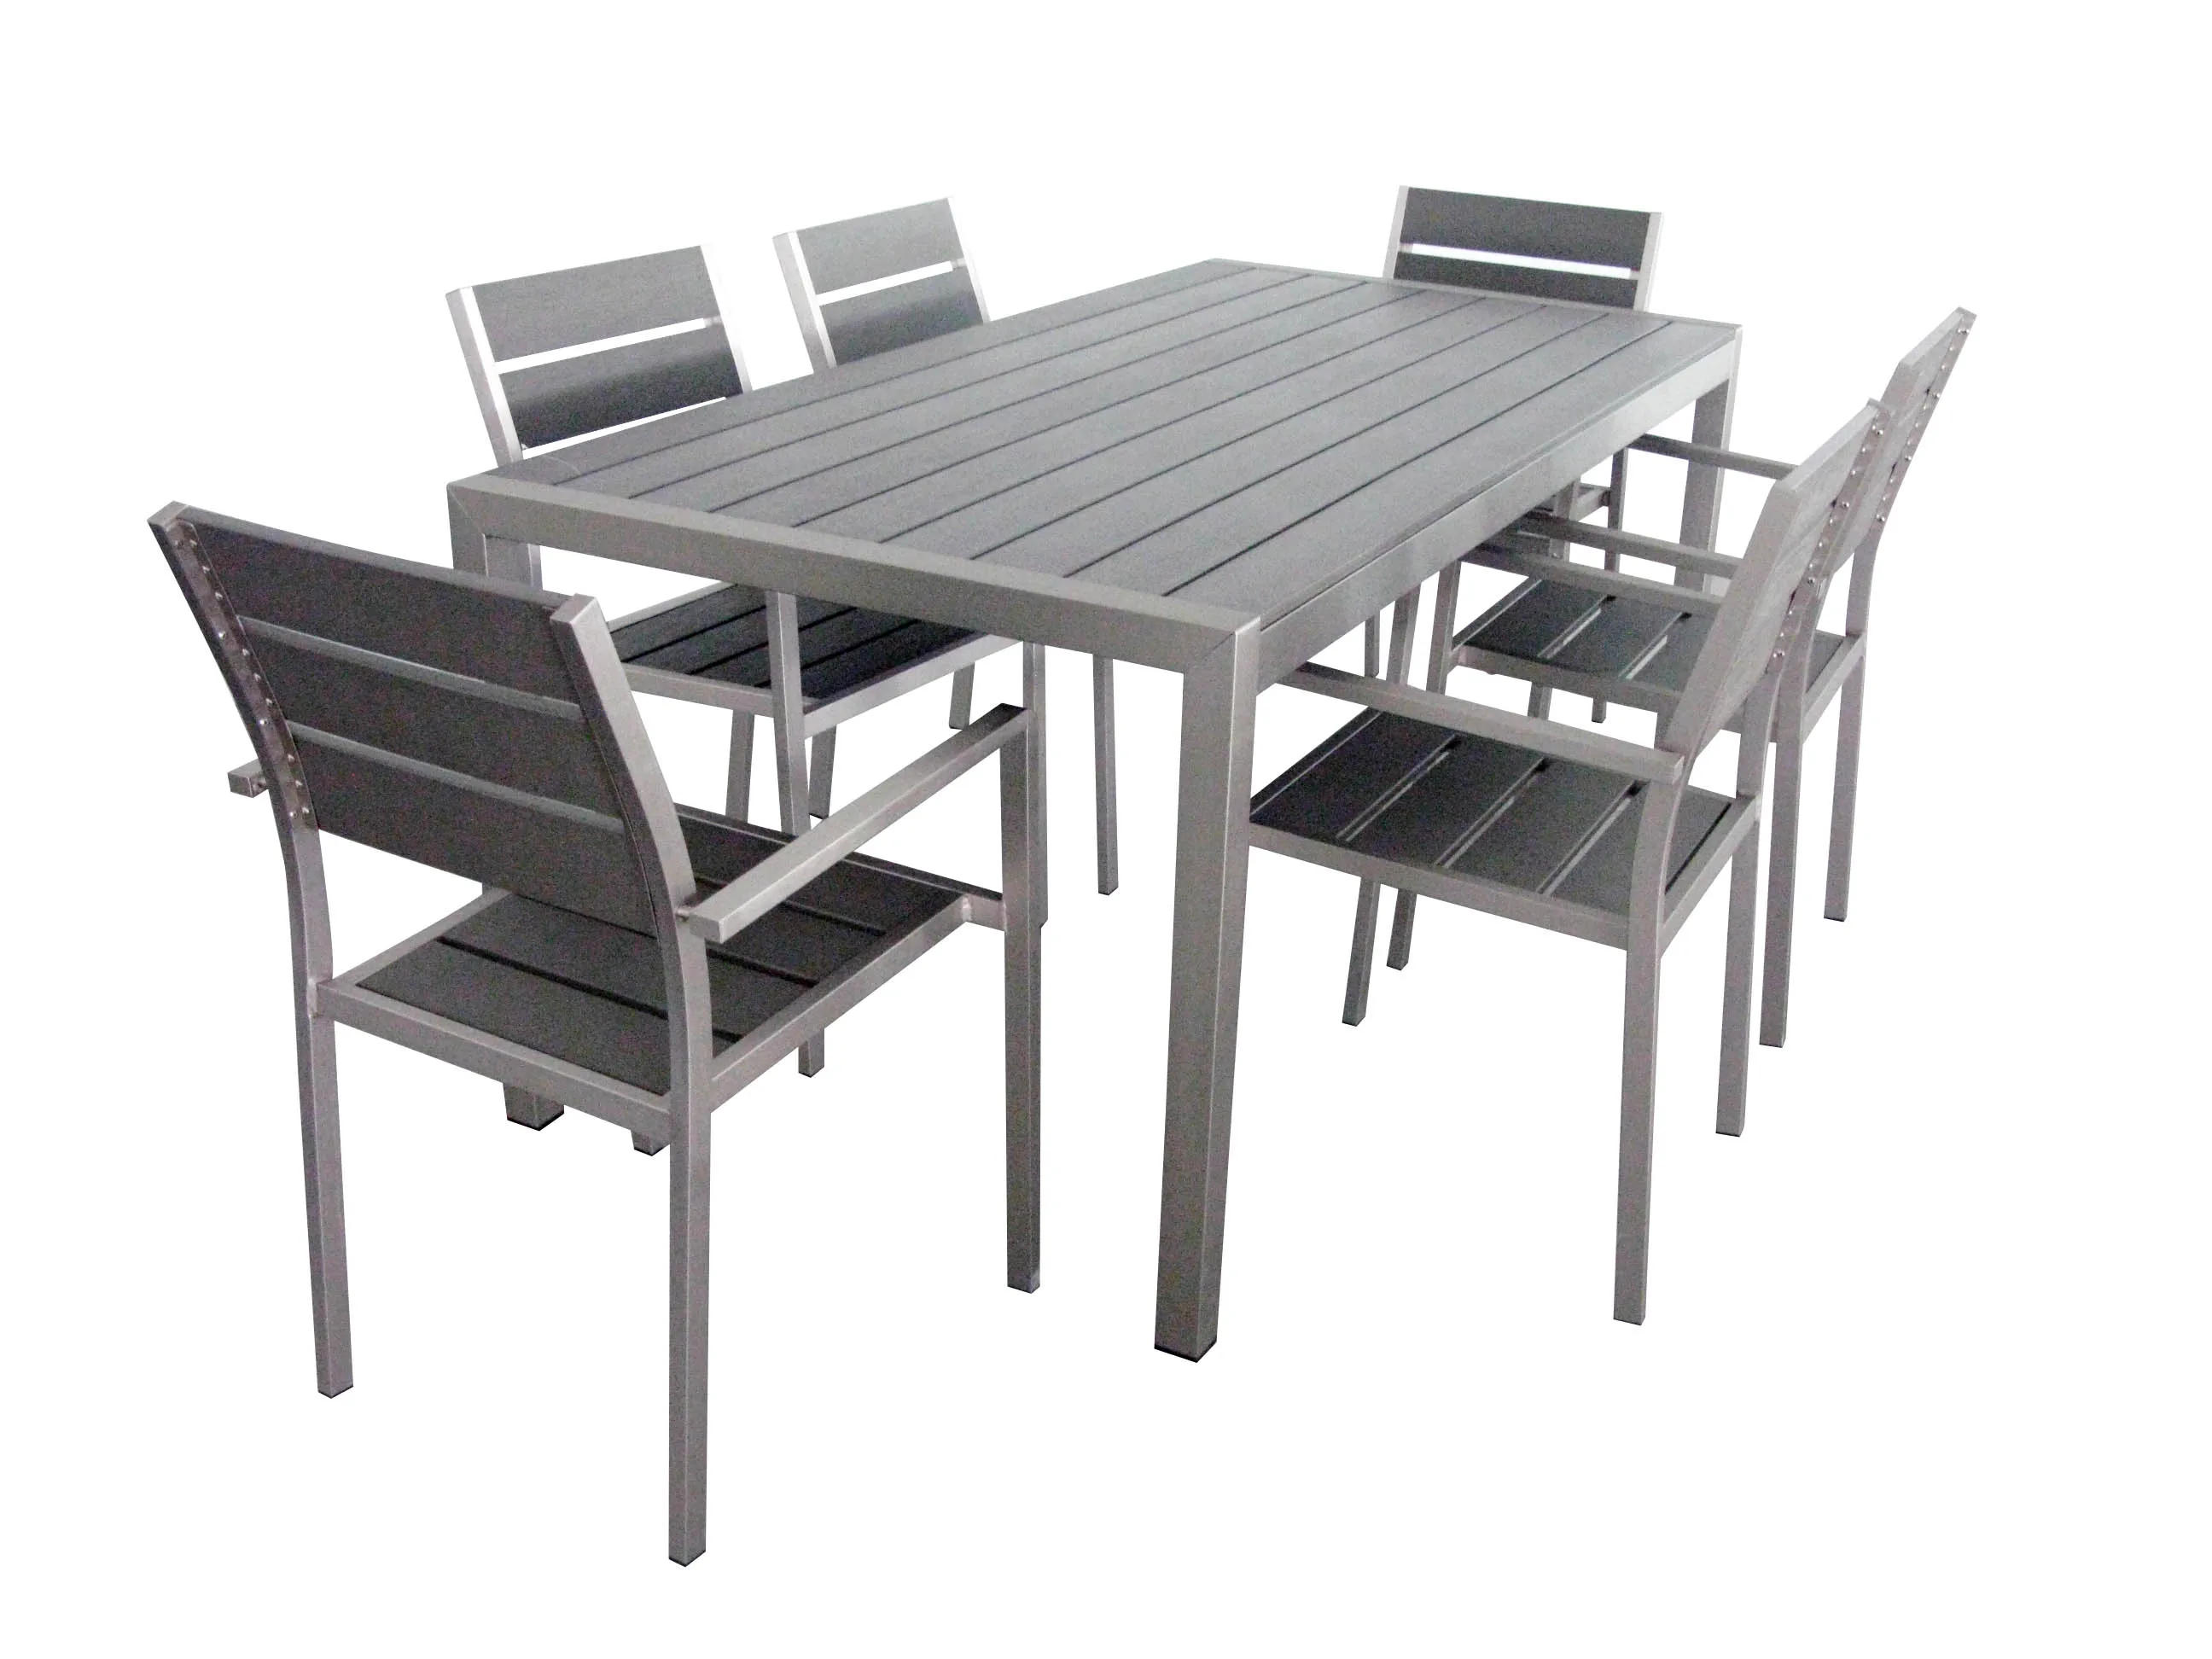 Da Vinci Art Custom Make Outdoor Garden Patio Wood Dining Furniture 6 Seater Oblong Royal Aluminum Dining Table And Chairs Set Buy Dining Table And Chairs Set Aluminum Dining Dining Furniture Product On